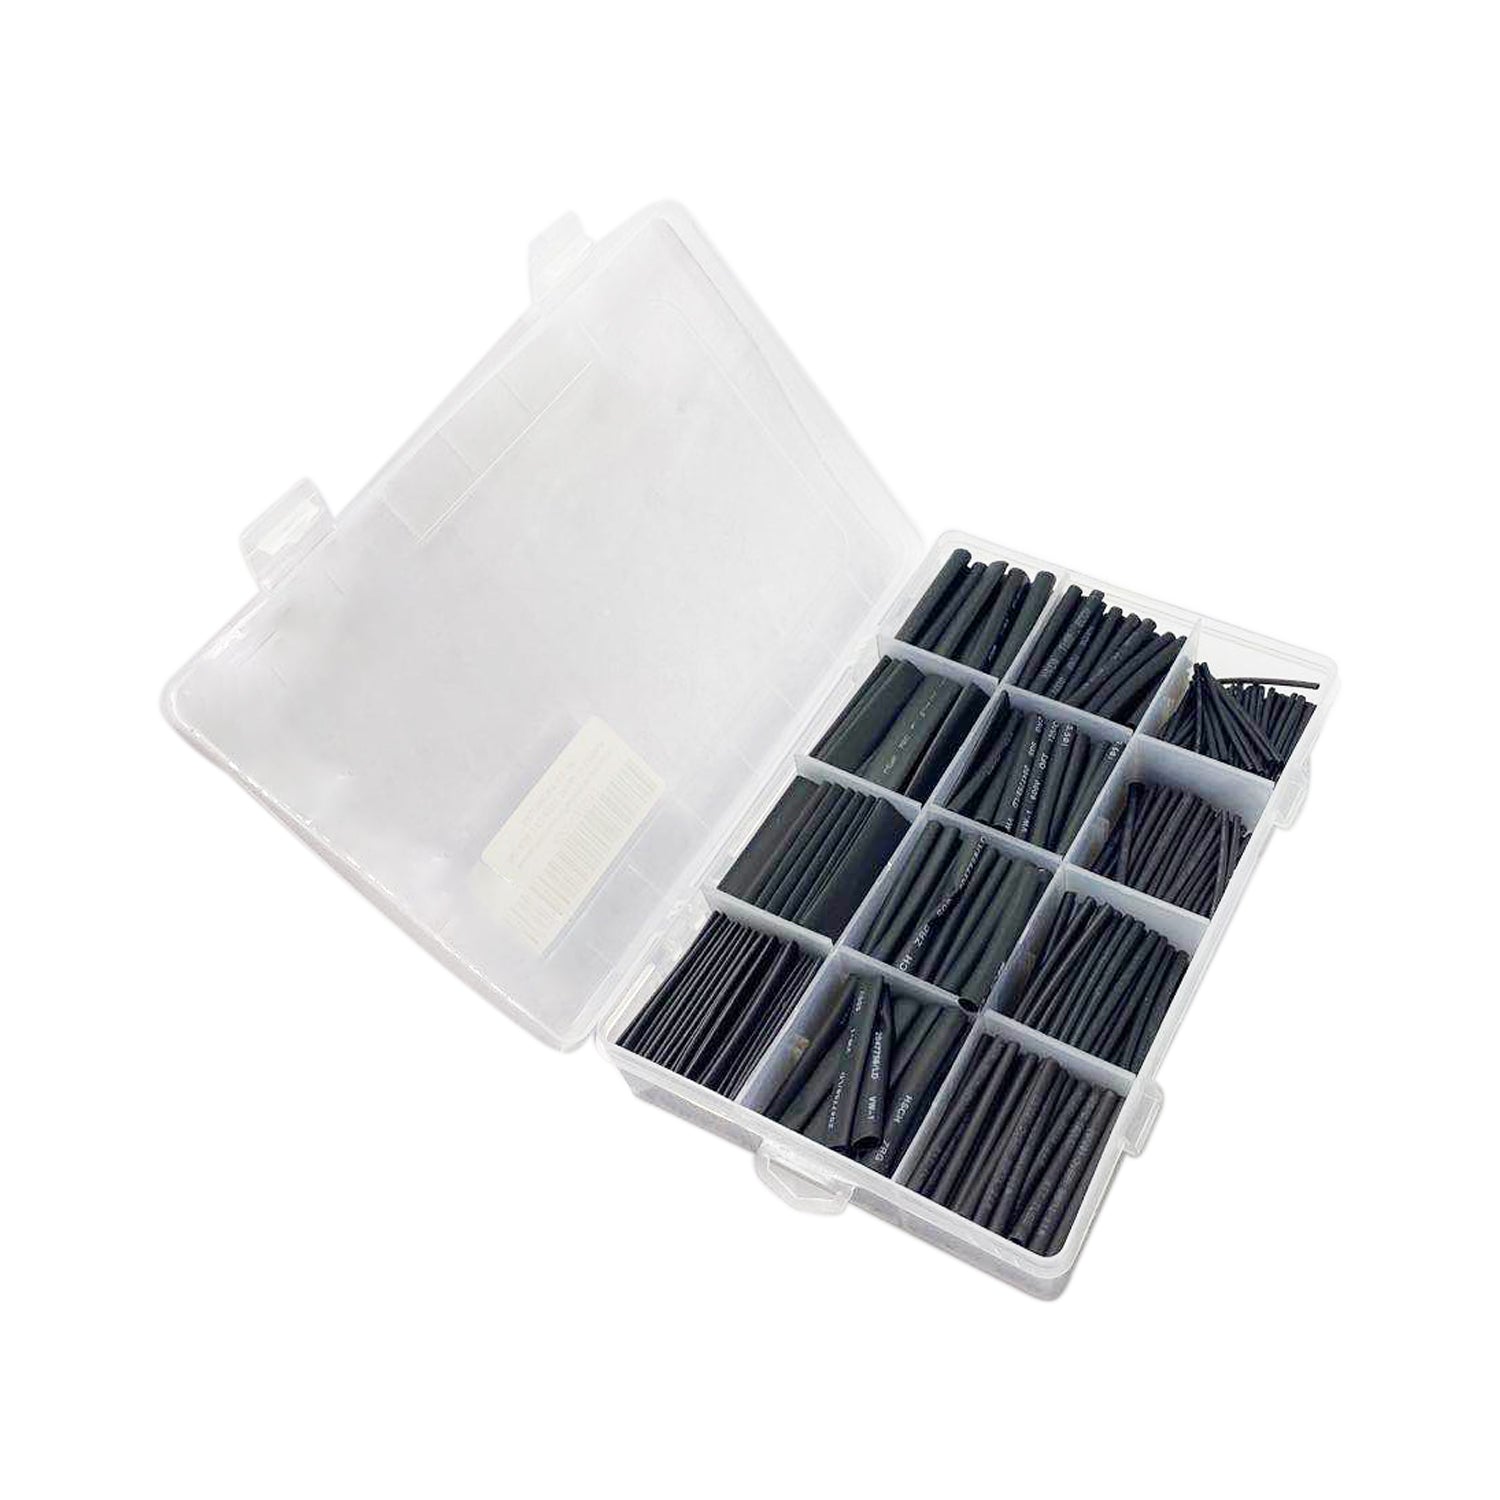 REES52® 560PCS Heat Shrink Tubing 2:1, Electrical Wire Cable Wrap  Assortment Electric Insulation Heat Shrink Tube Kit with Box(5 colors/12  Sizes) : : Industrial & Scientific